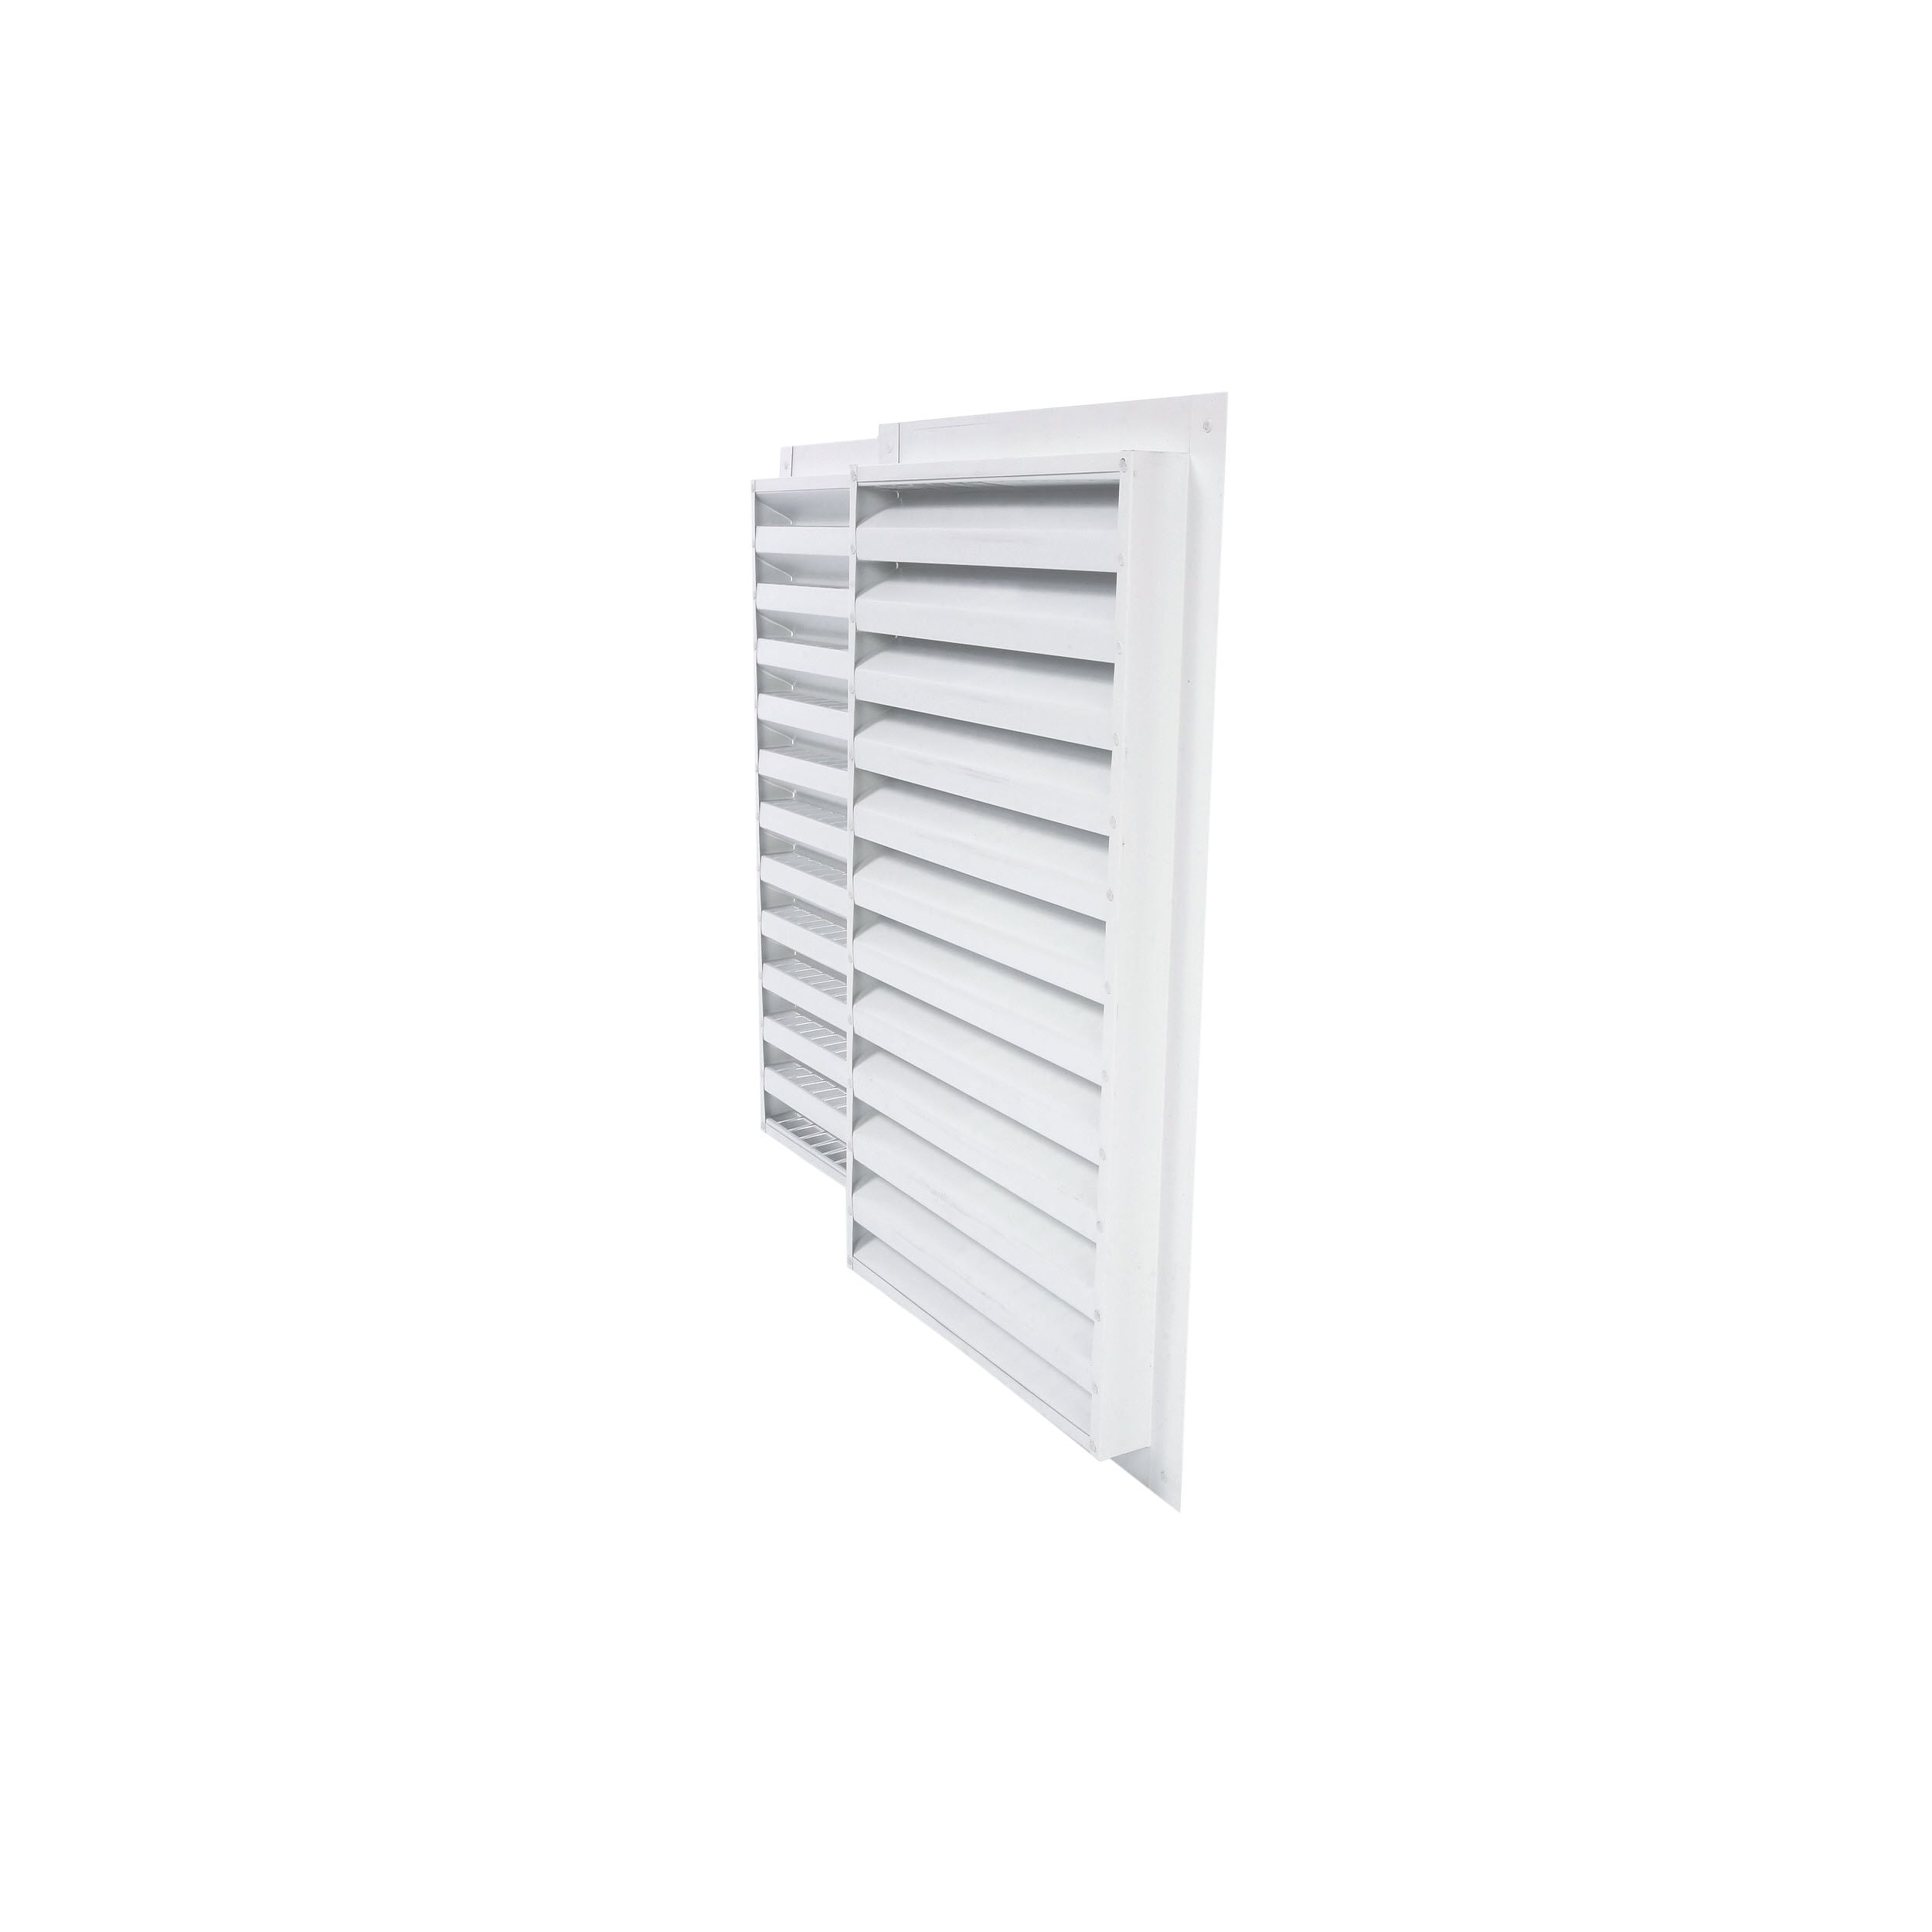 81134 Air Vent 14 In Mill Aluminum Wall End Louver X 24 In FREE SHIPPING 